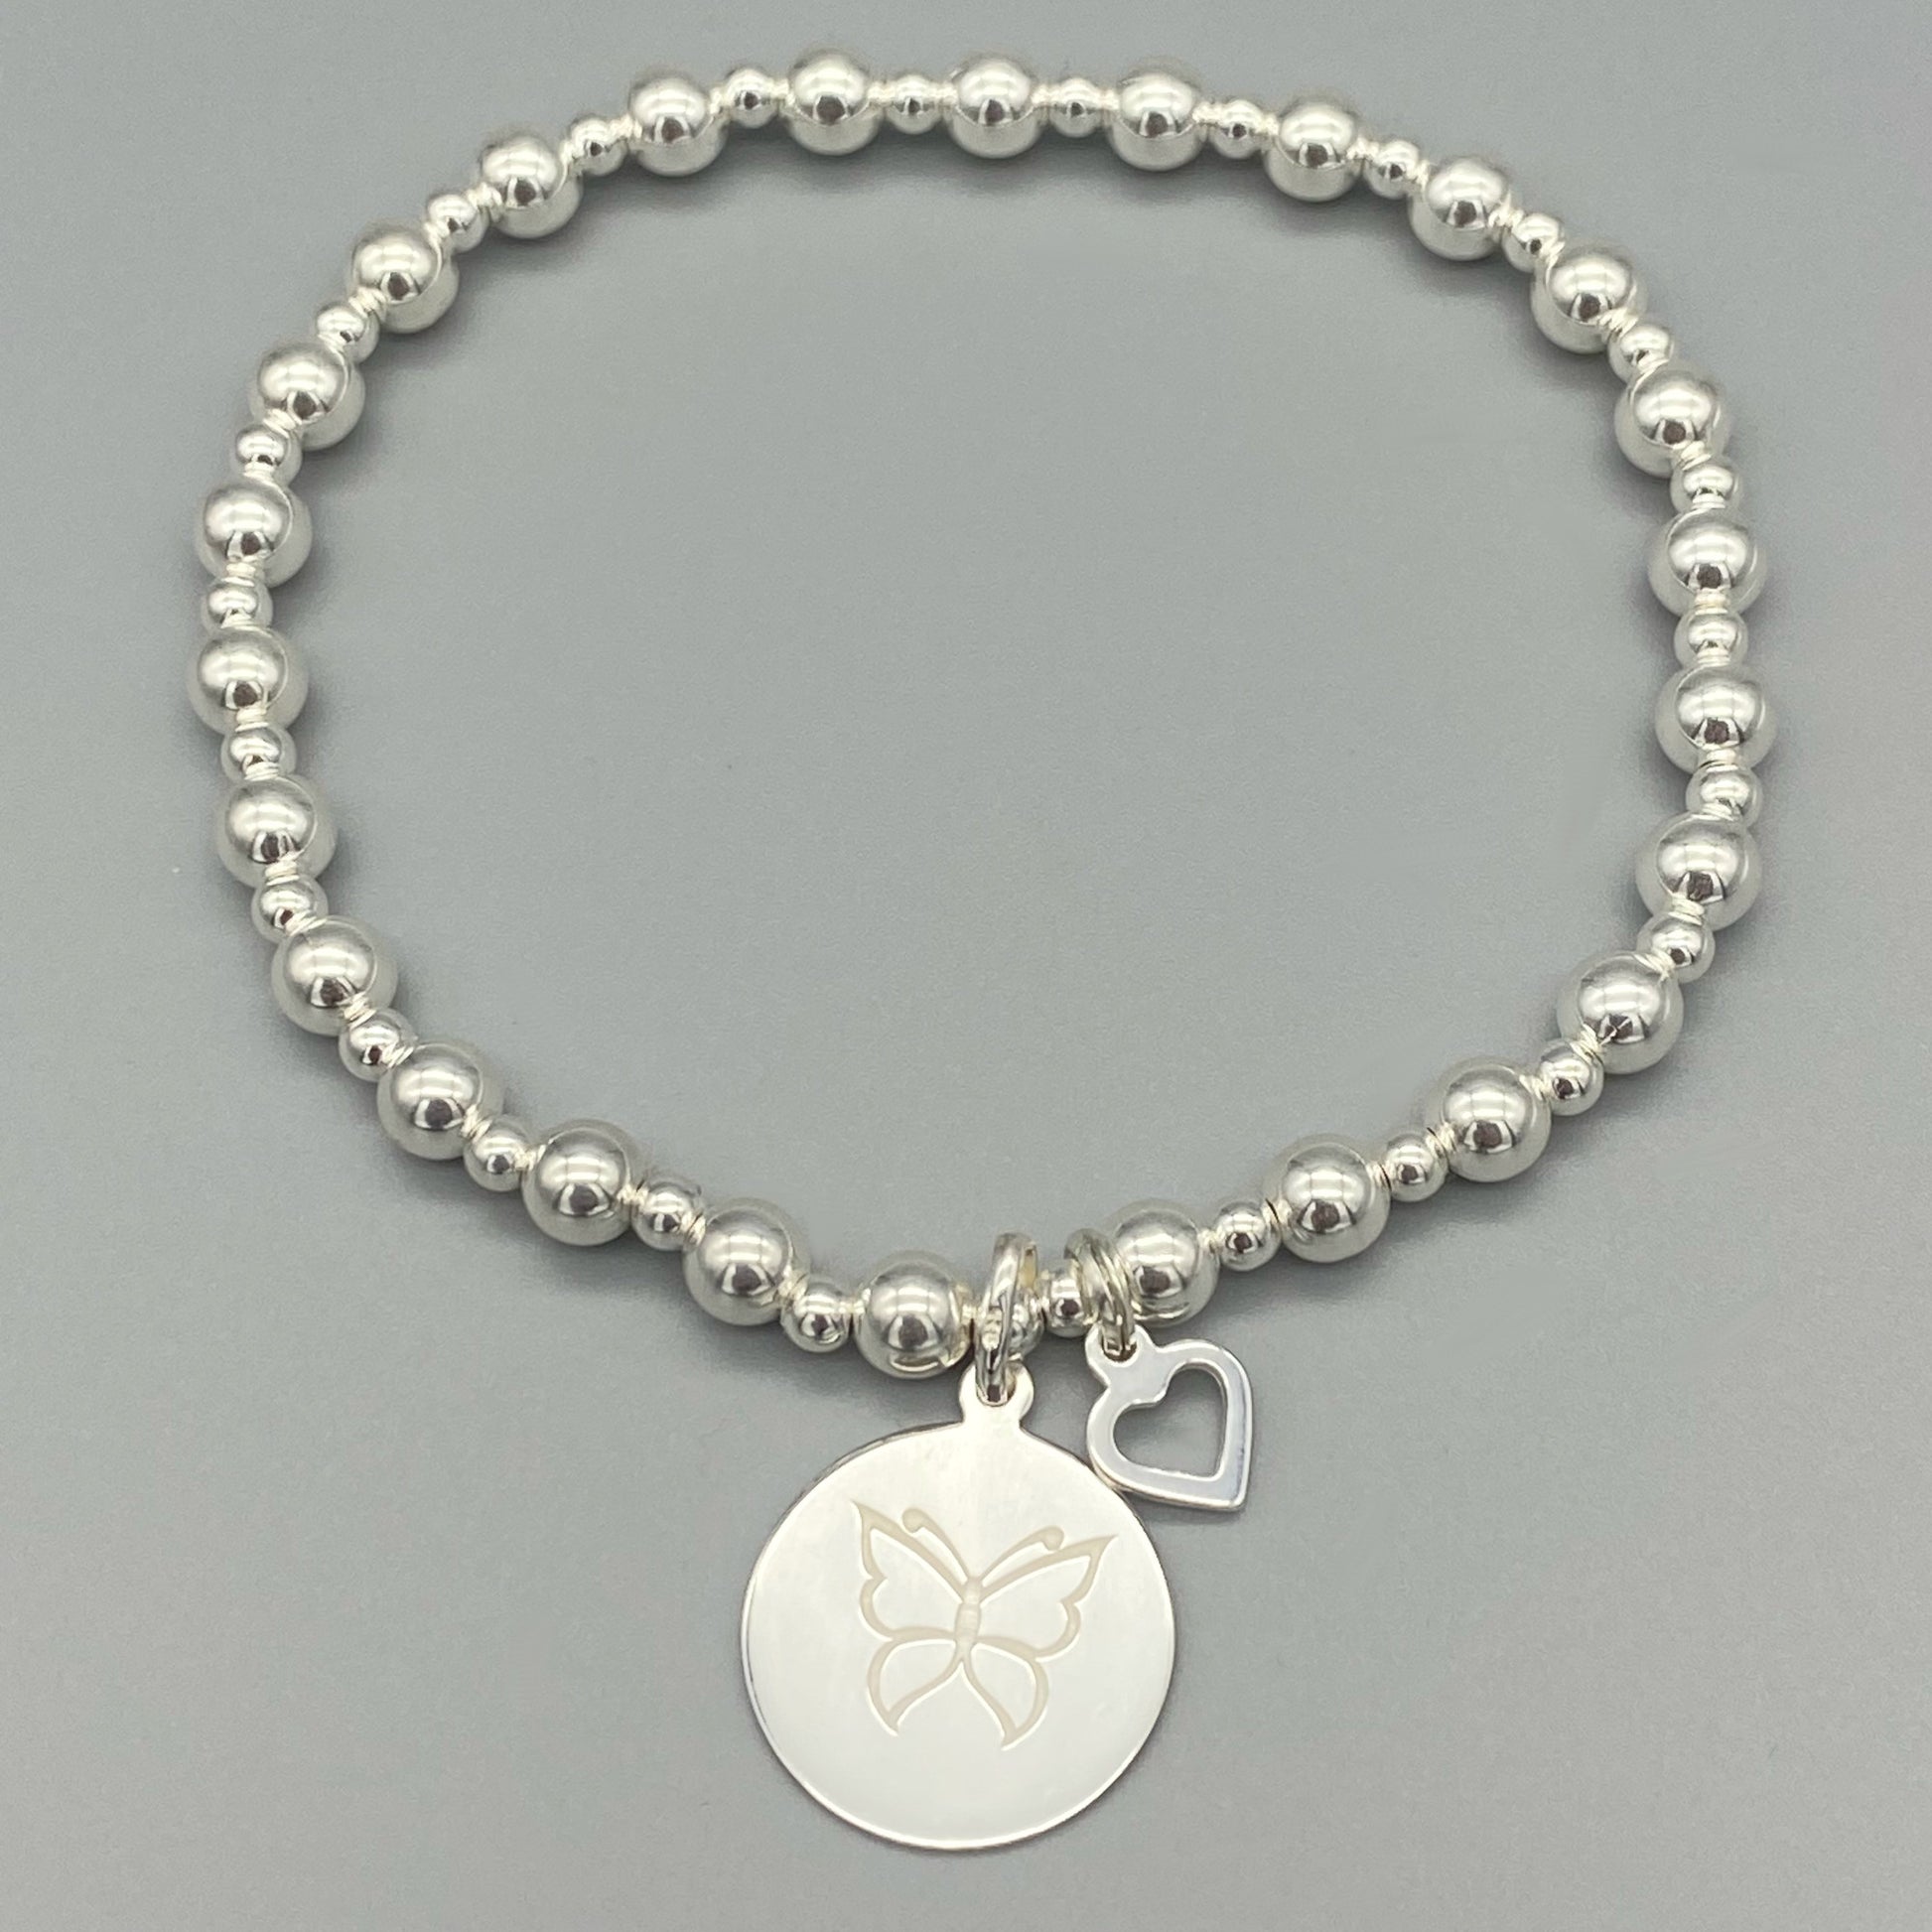 "Sister there is no better friend..." with butterfly symbol women's sterling silver stacking bracelet by My Silver Wish